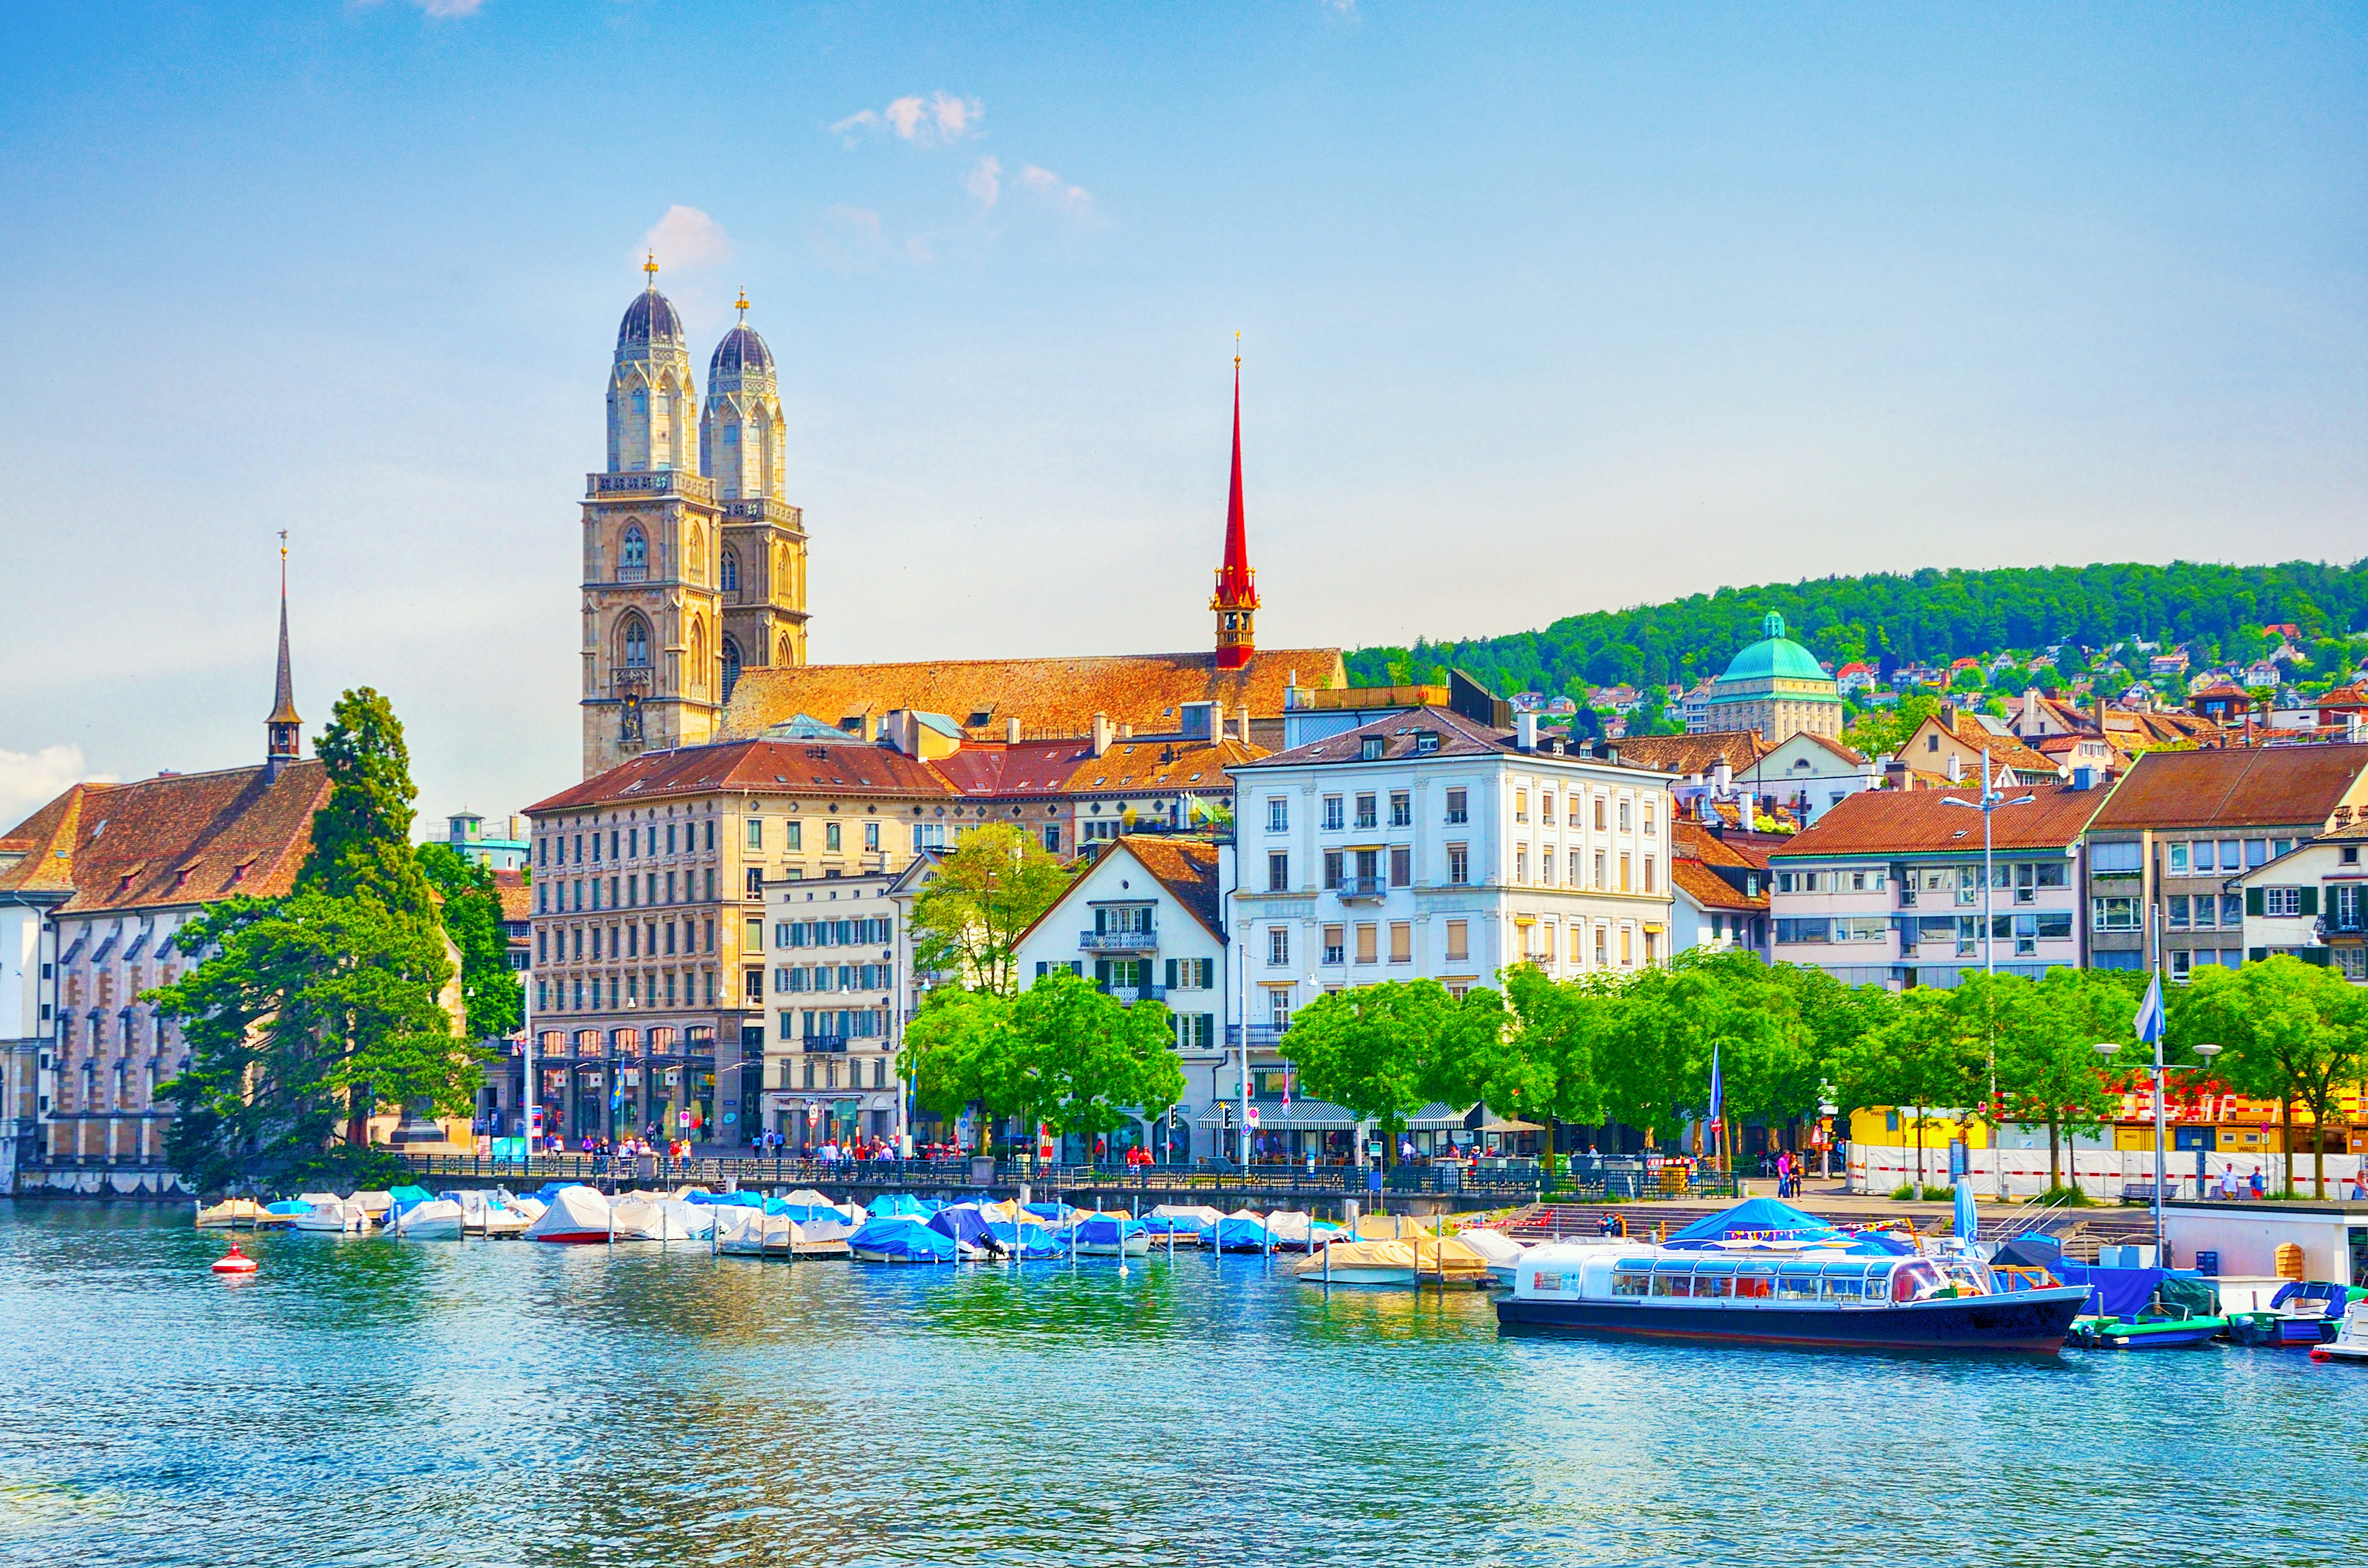 Zurich is one of the world’s quietest cities